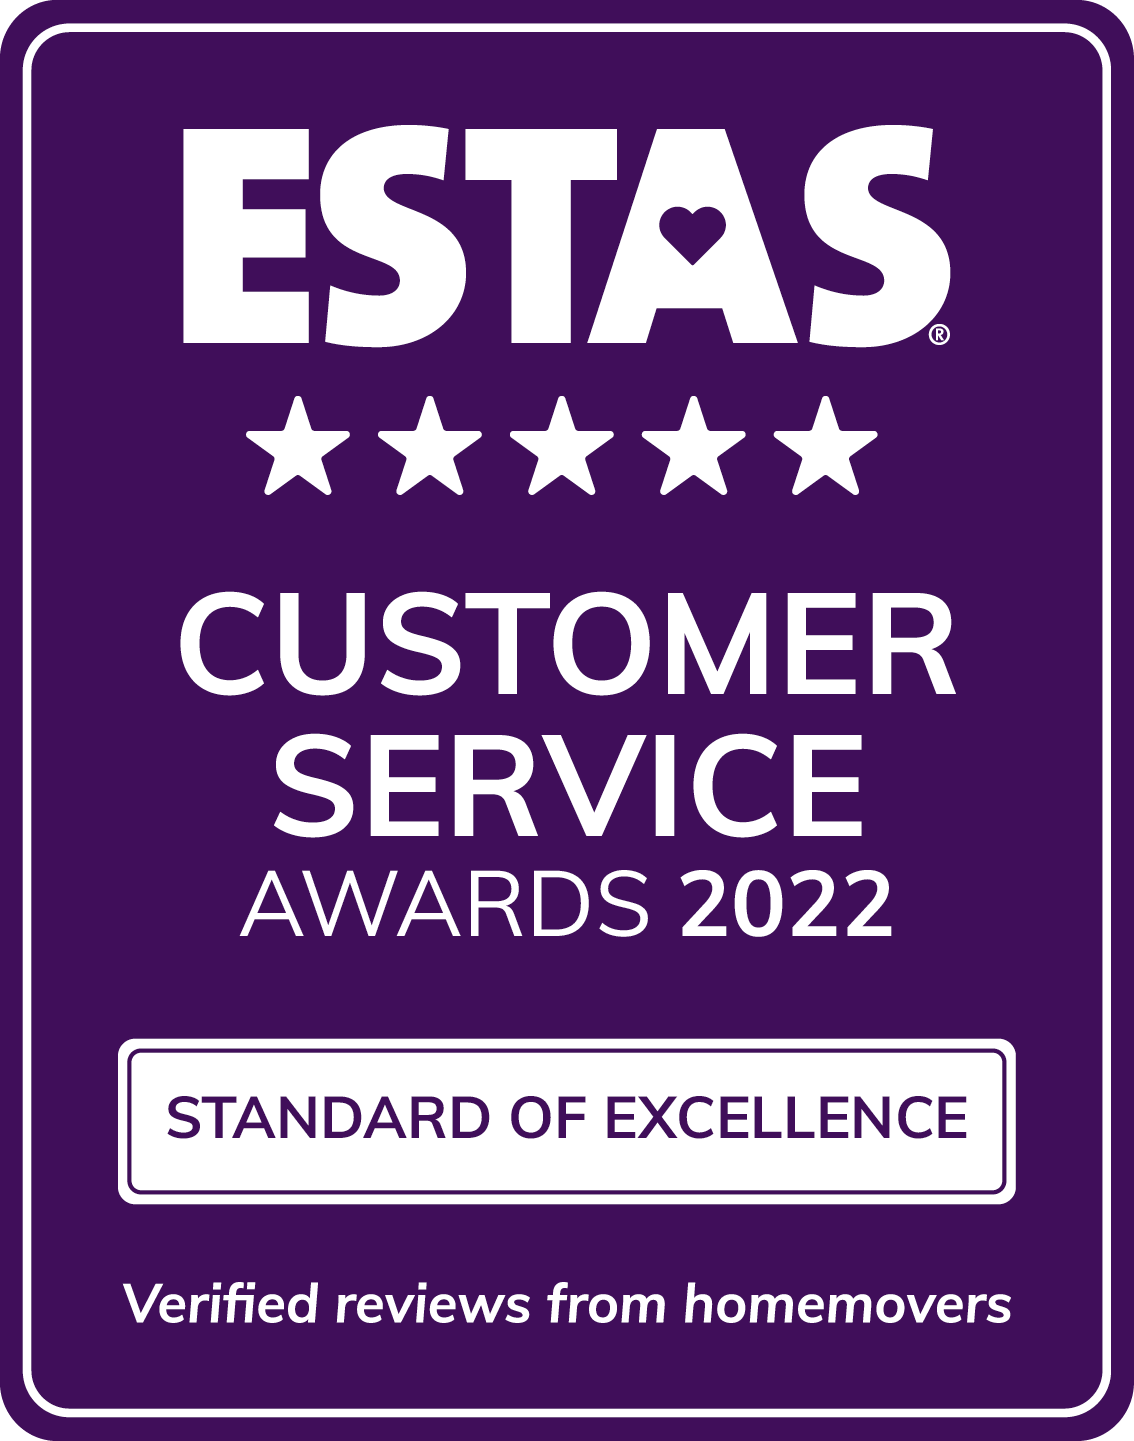 M&M Estate and Letting Agents achieves ‘Standard of Excellence’ to make The ESTAS shortlist for 2022